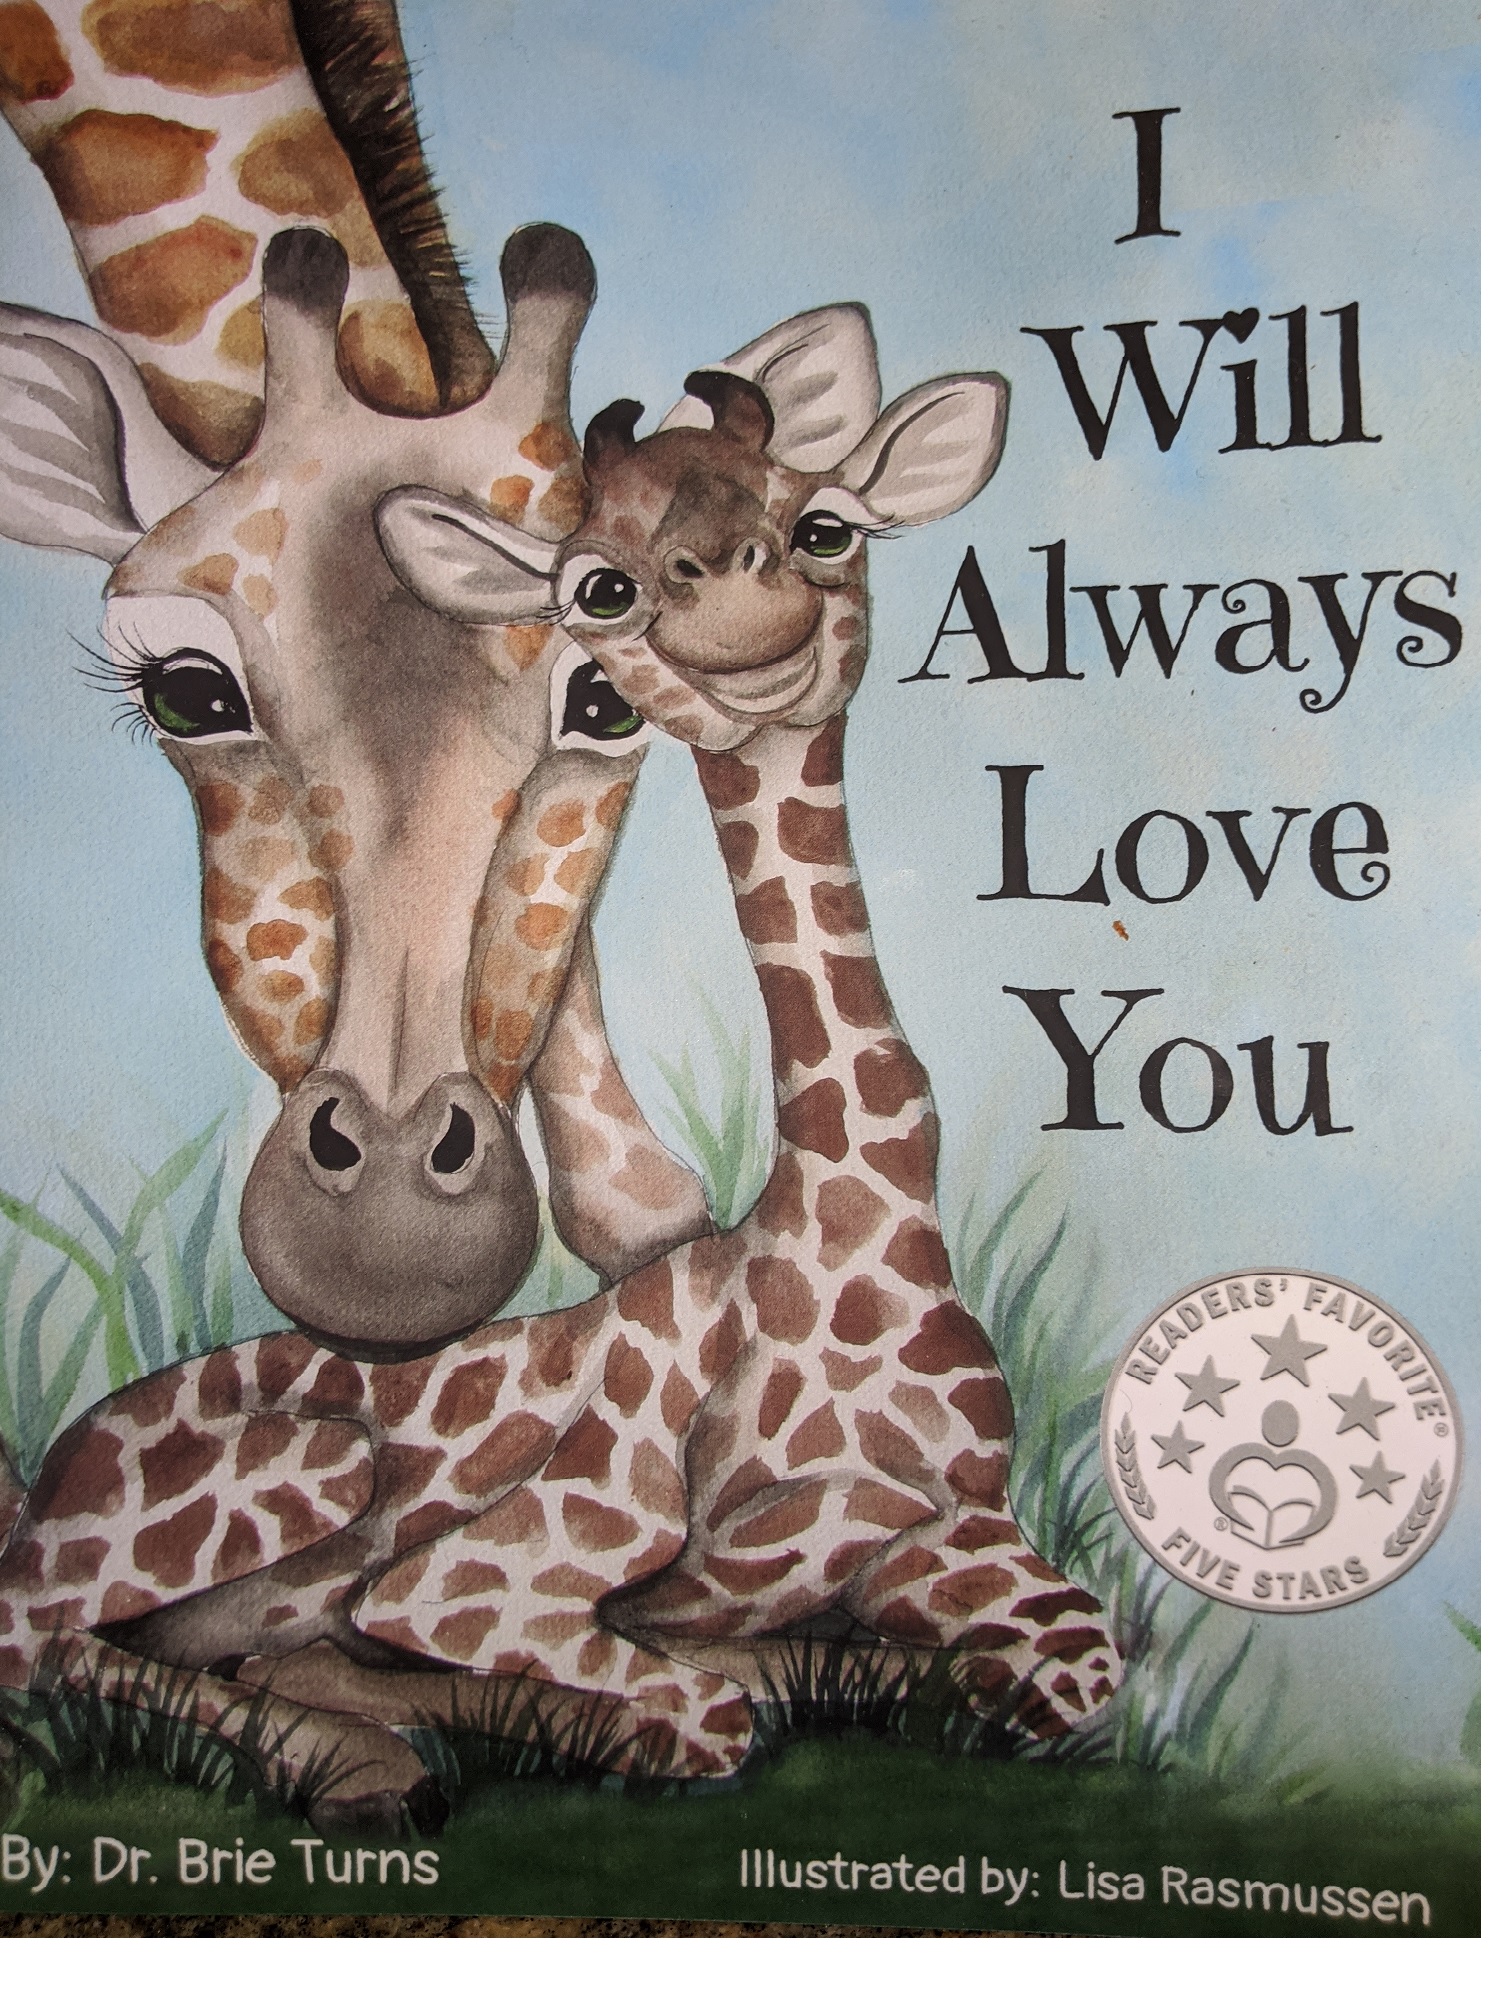 Book - I will always love you